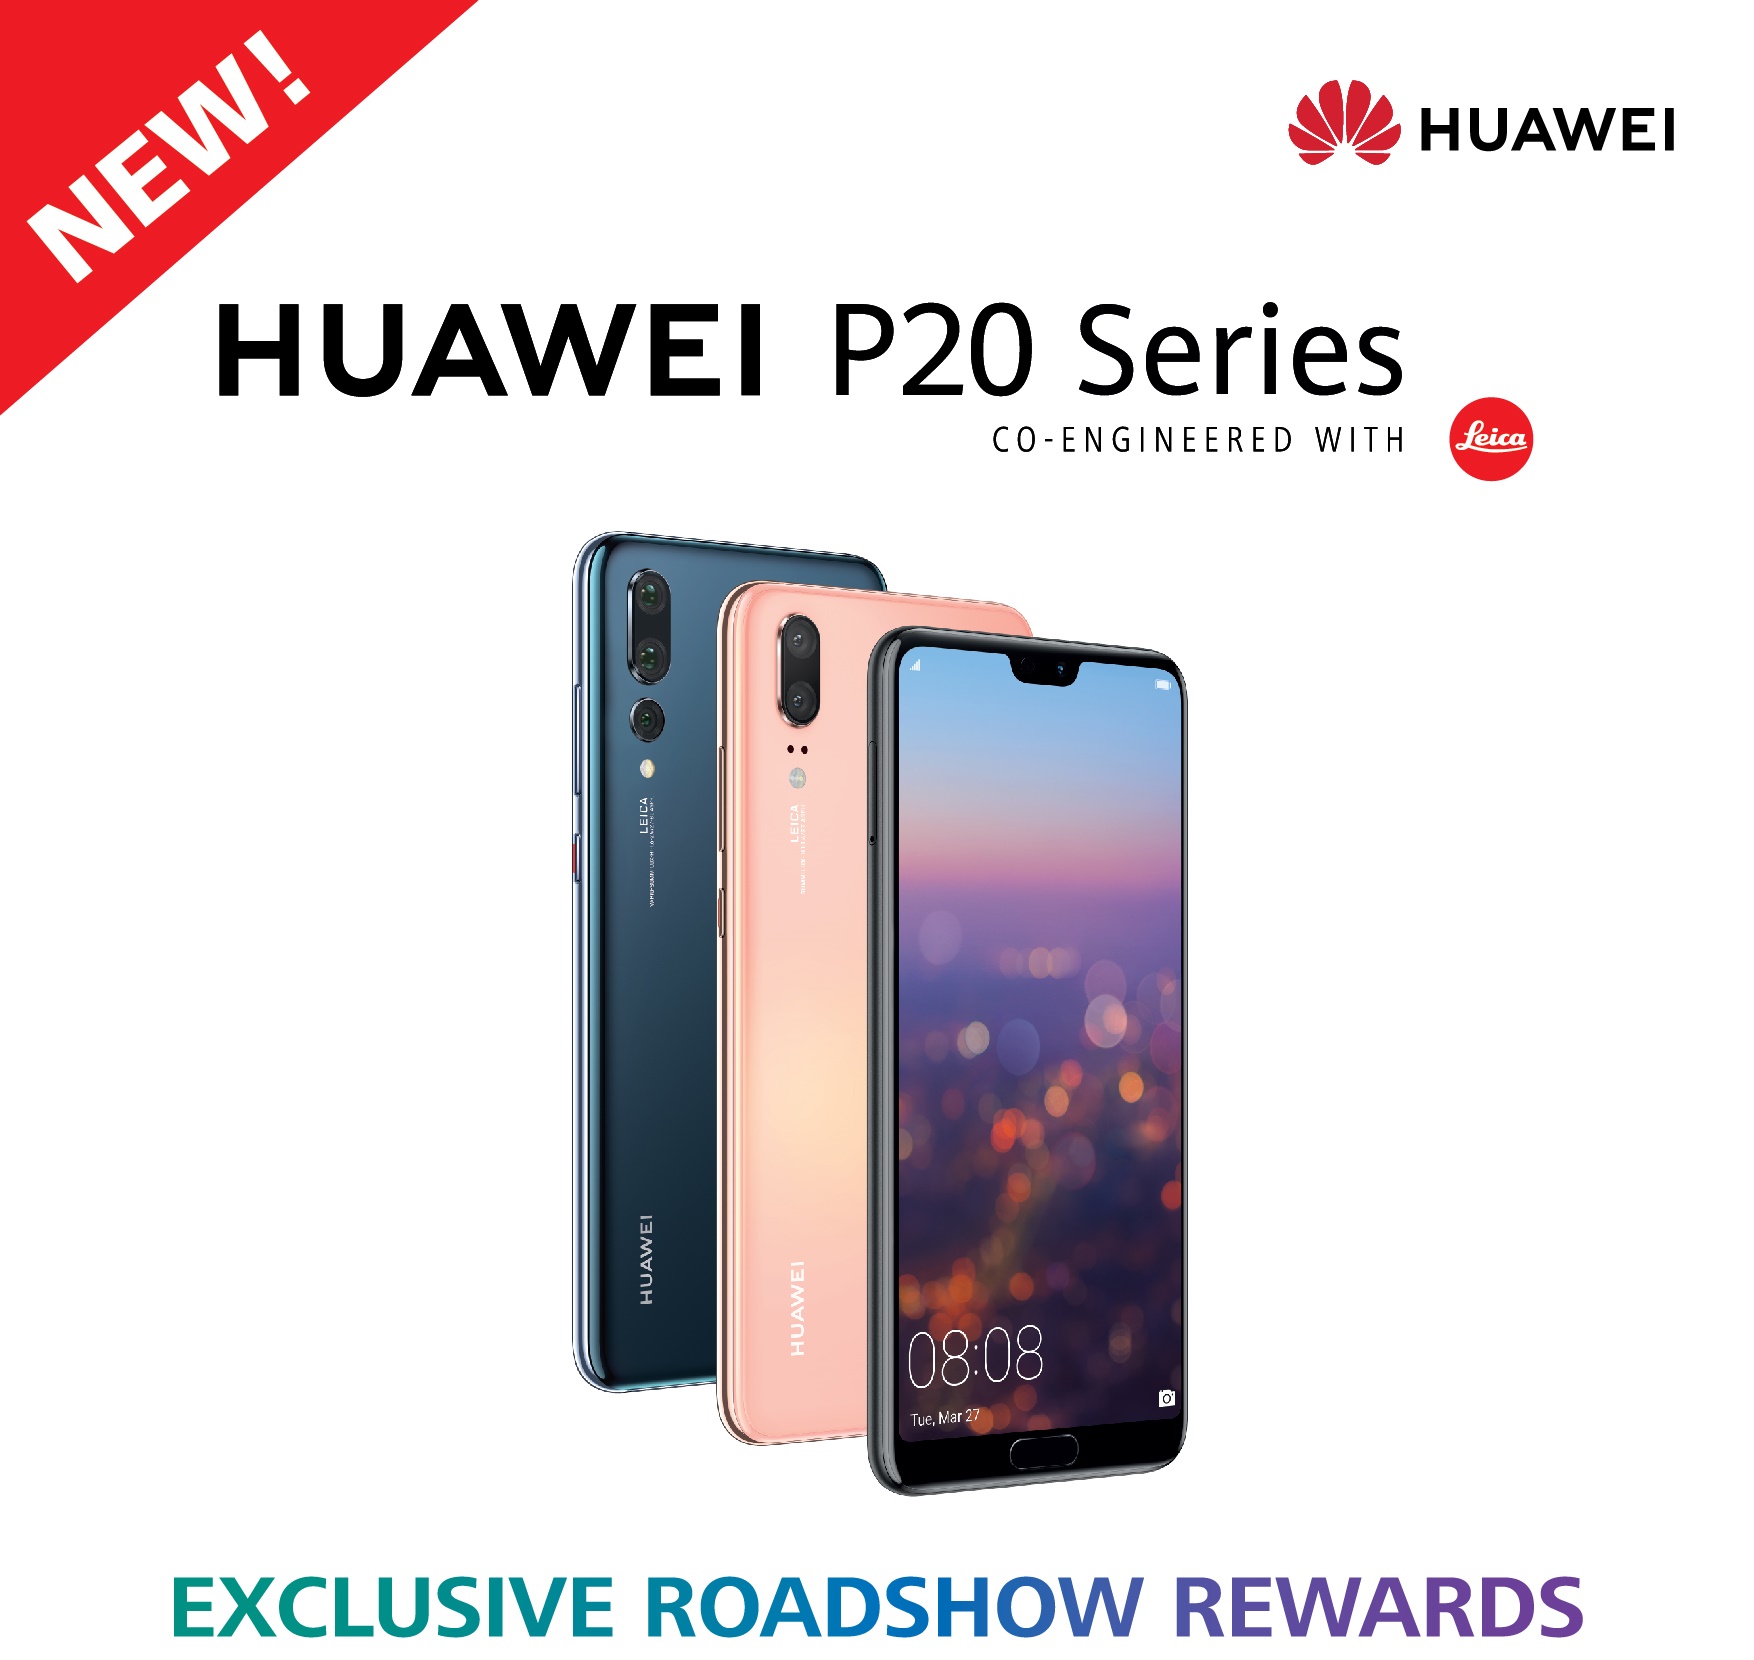 Huawei P20 Roadshow with a free P20 Pro giveaway prize coming soon to KL and Penang on 6 April